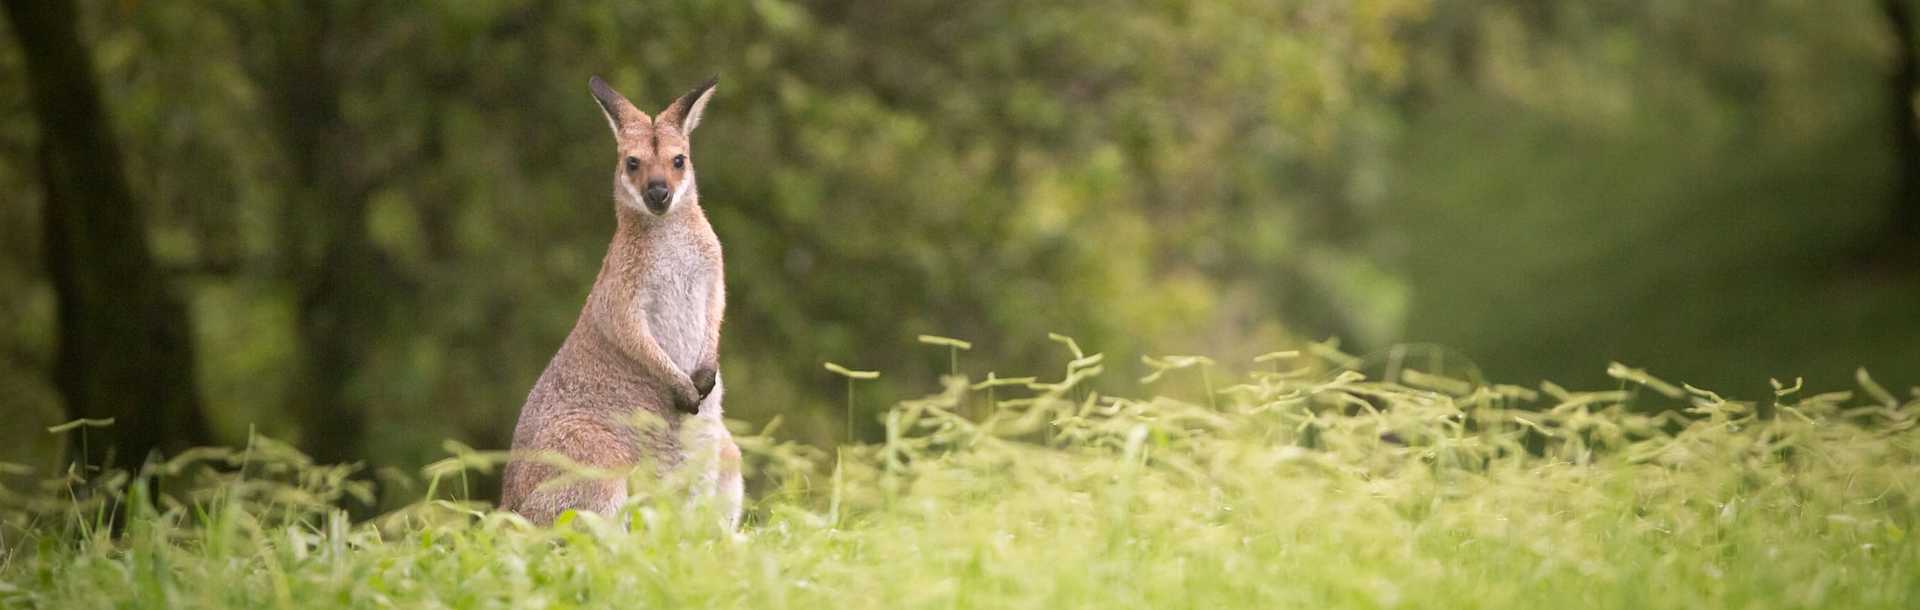 Wallaby in the forest, Australia.